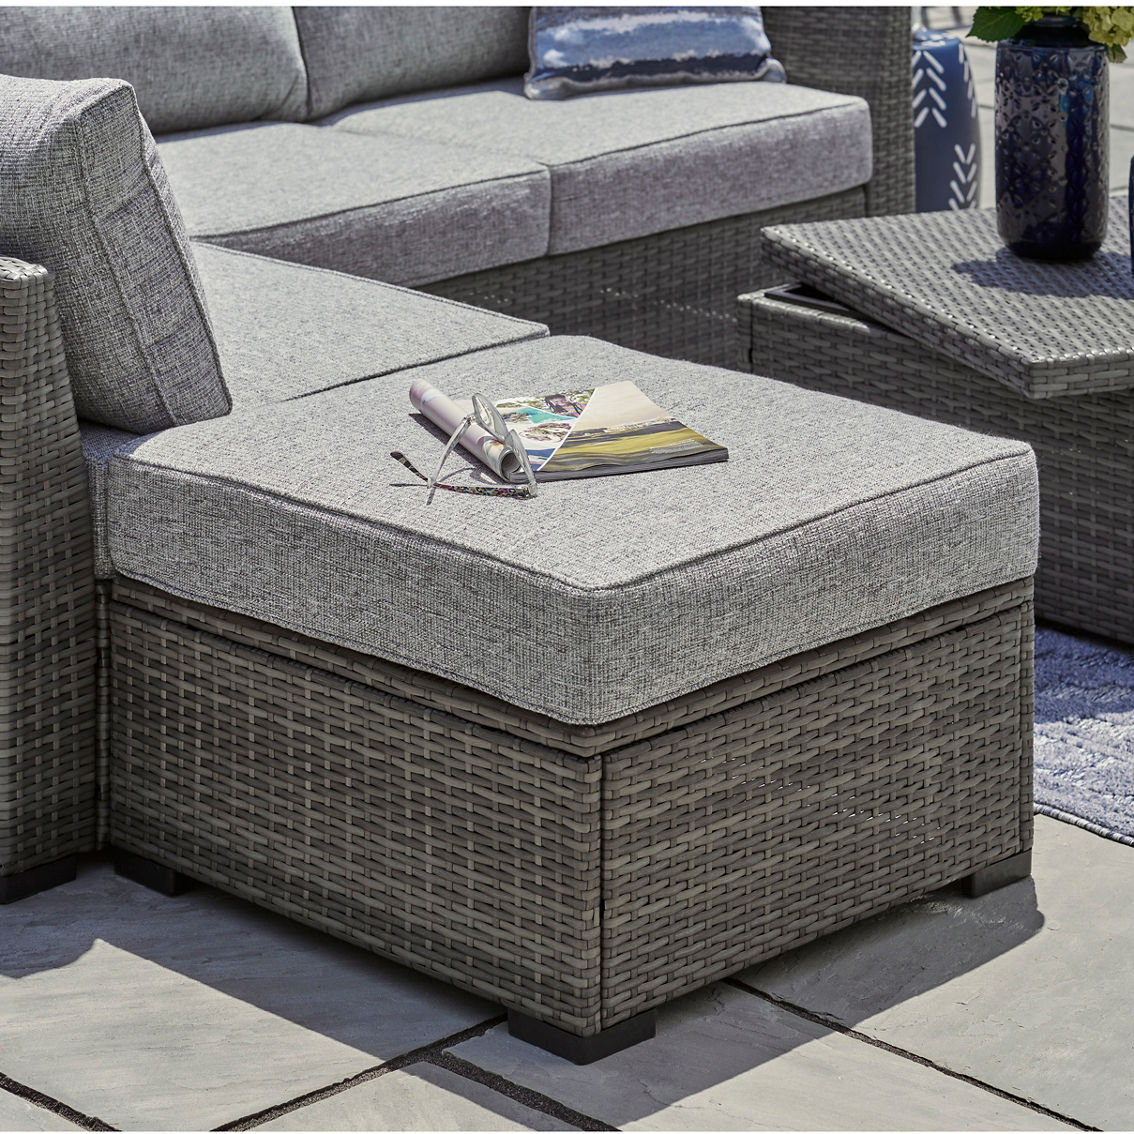 Signature Design by Ashley Petal Road 4 pc. Outdoor Sectional Set - Image 3 of 3